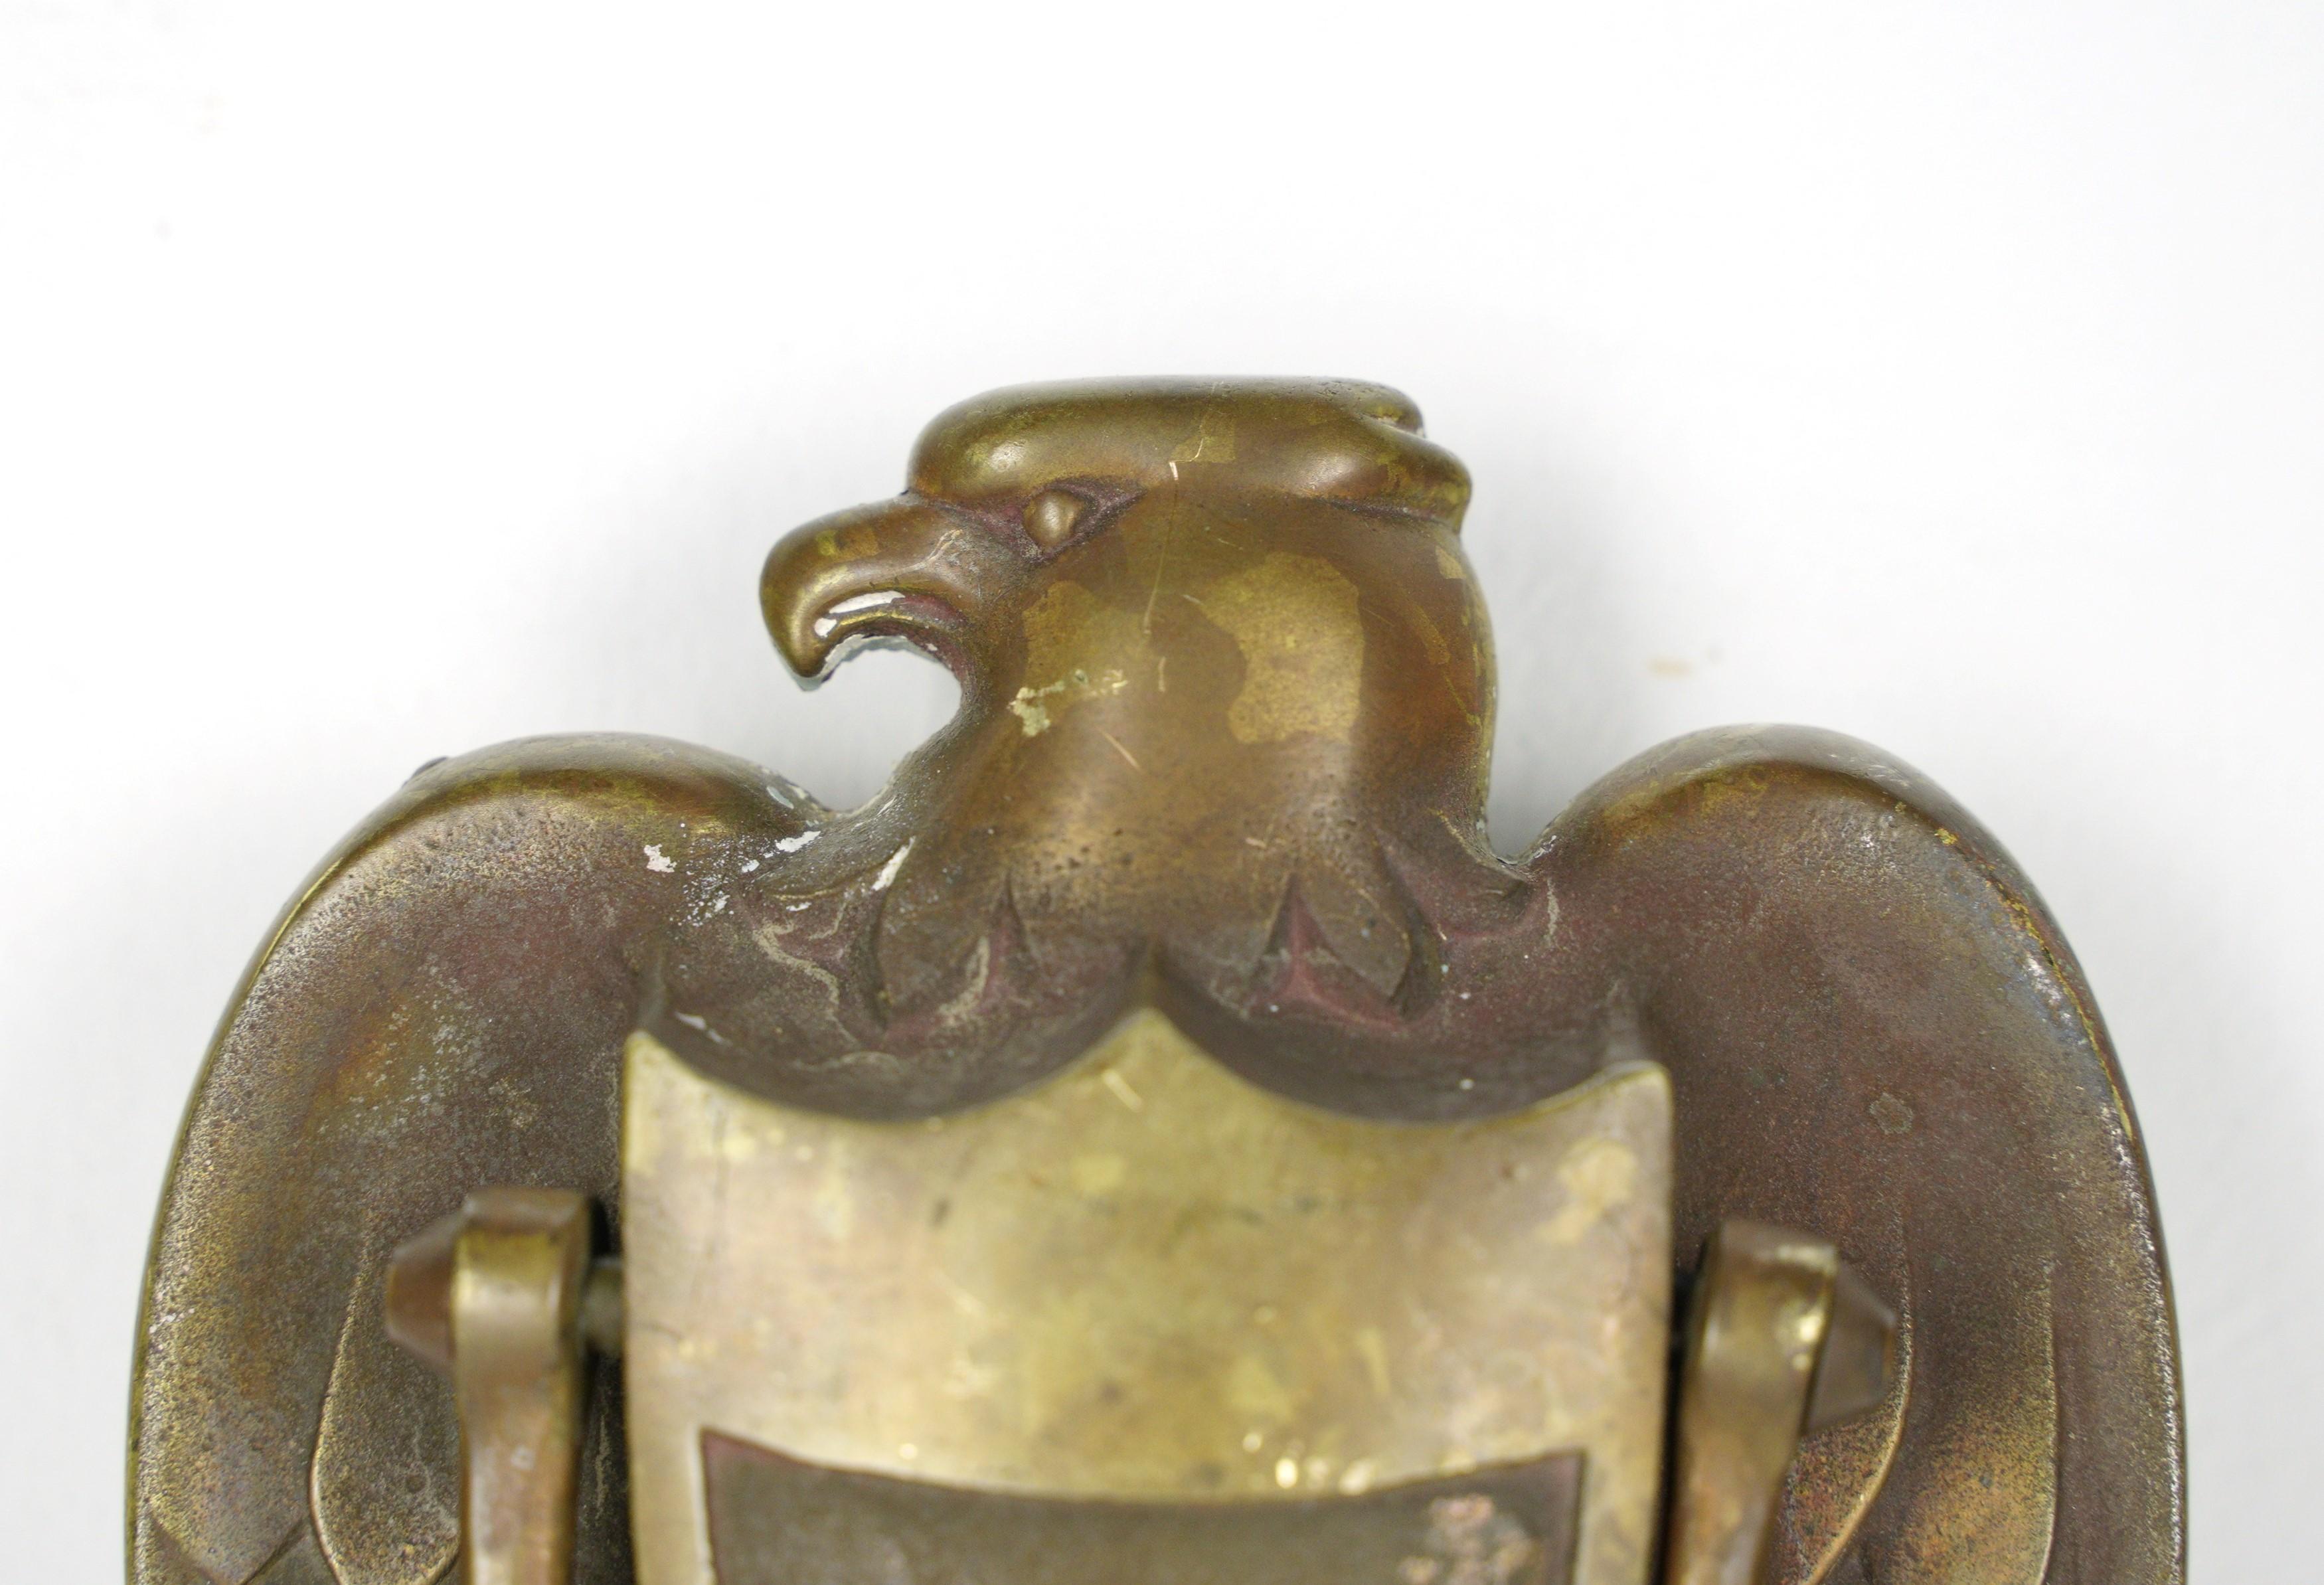 This door knocker features a majestic eagle motif in brass, adding a touch of regal charm to your front door. Whether you're looking to make a statement or embrace a patriotic theme, this vintage door knocker combines both functionality and classic